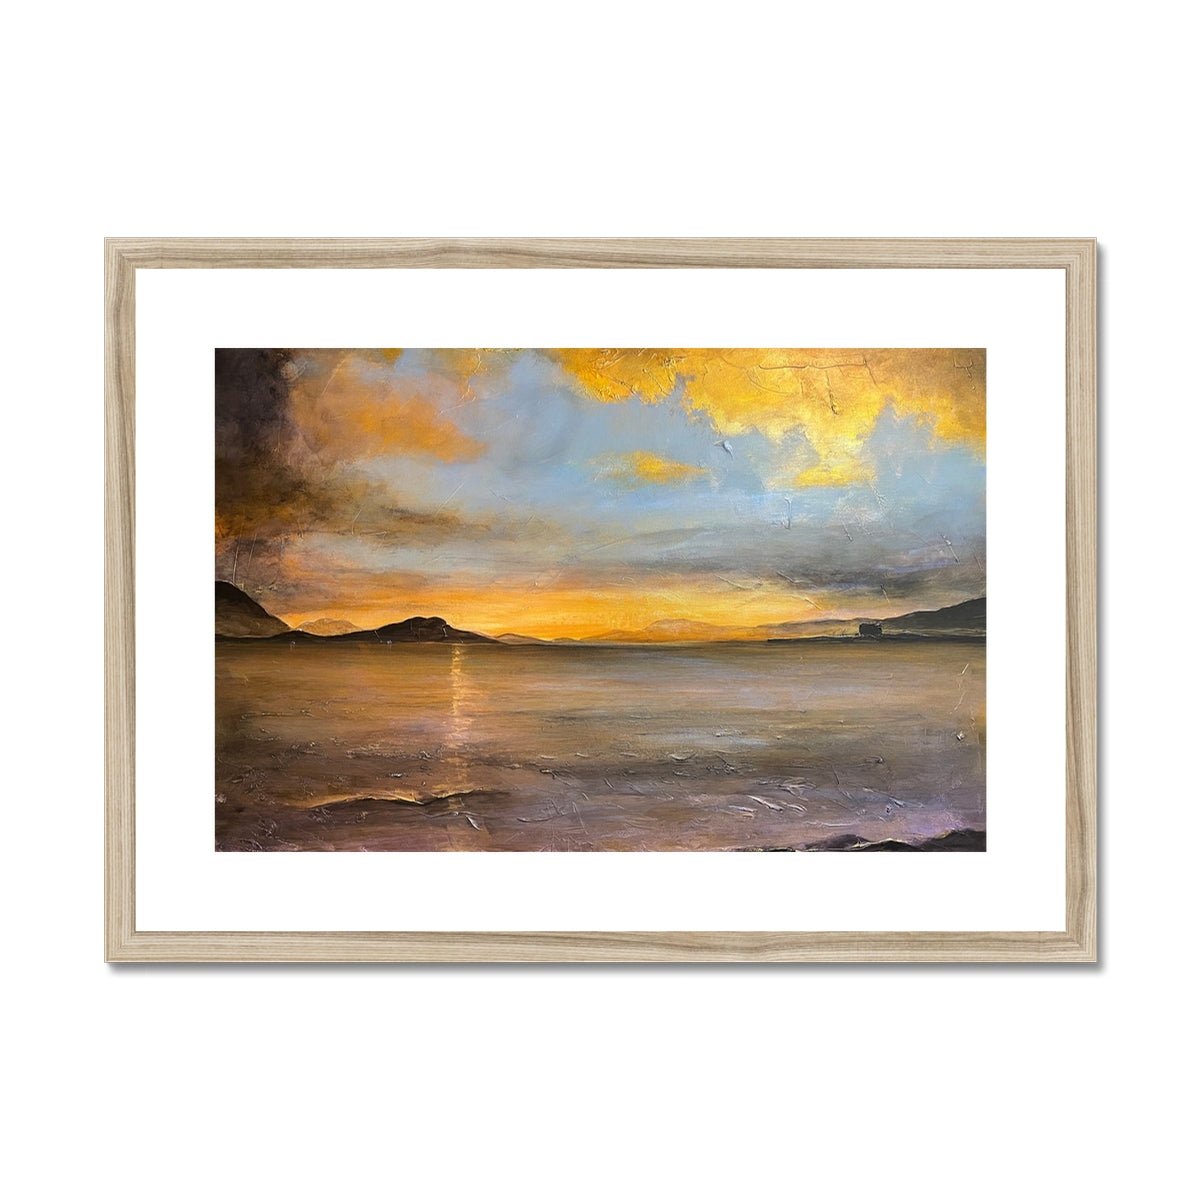 Loch Linnhe Sunset Painting | Framed & Mounted Prints From Scotland-Framed & Mounted Prints-Scottish Lochs & Mountains Art Gallery-A2 Landscape-Natural Frame-Paintings, Prints, Homeware, Art Gifts From Scotland By Scottish Artist Kevin Hunter